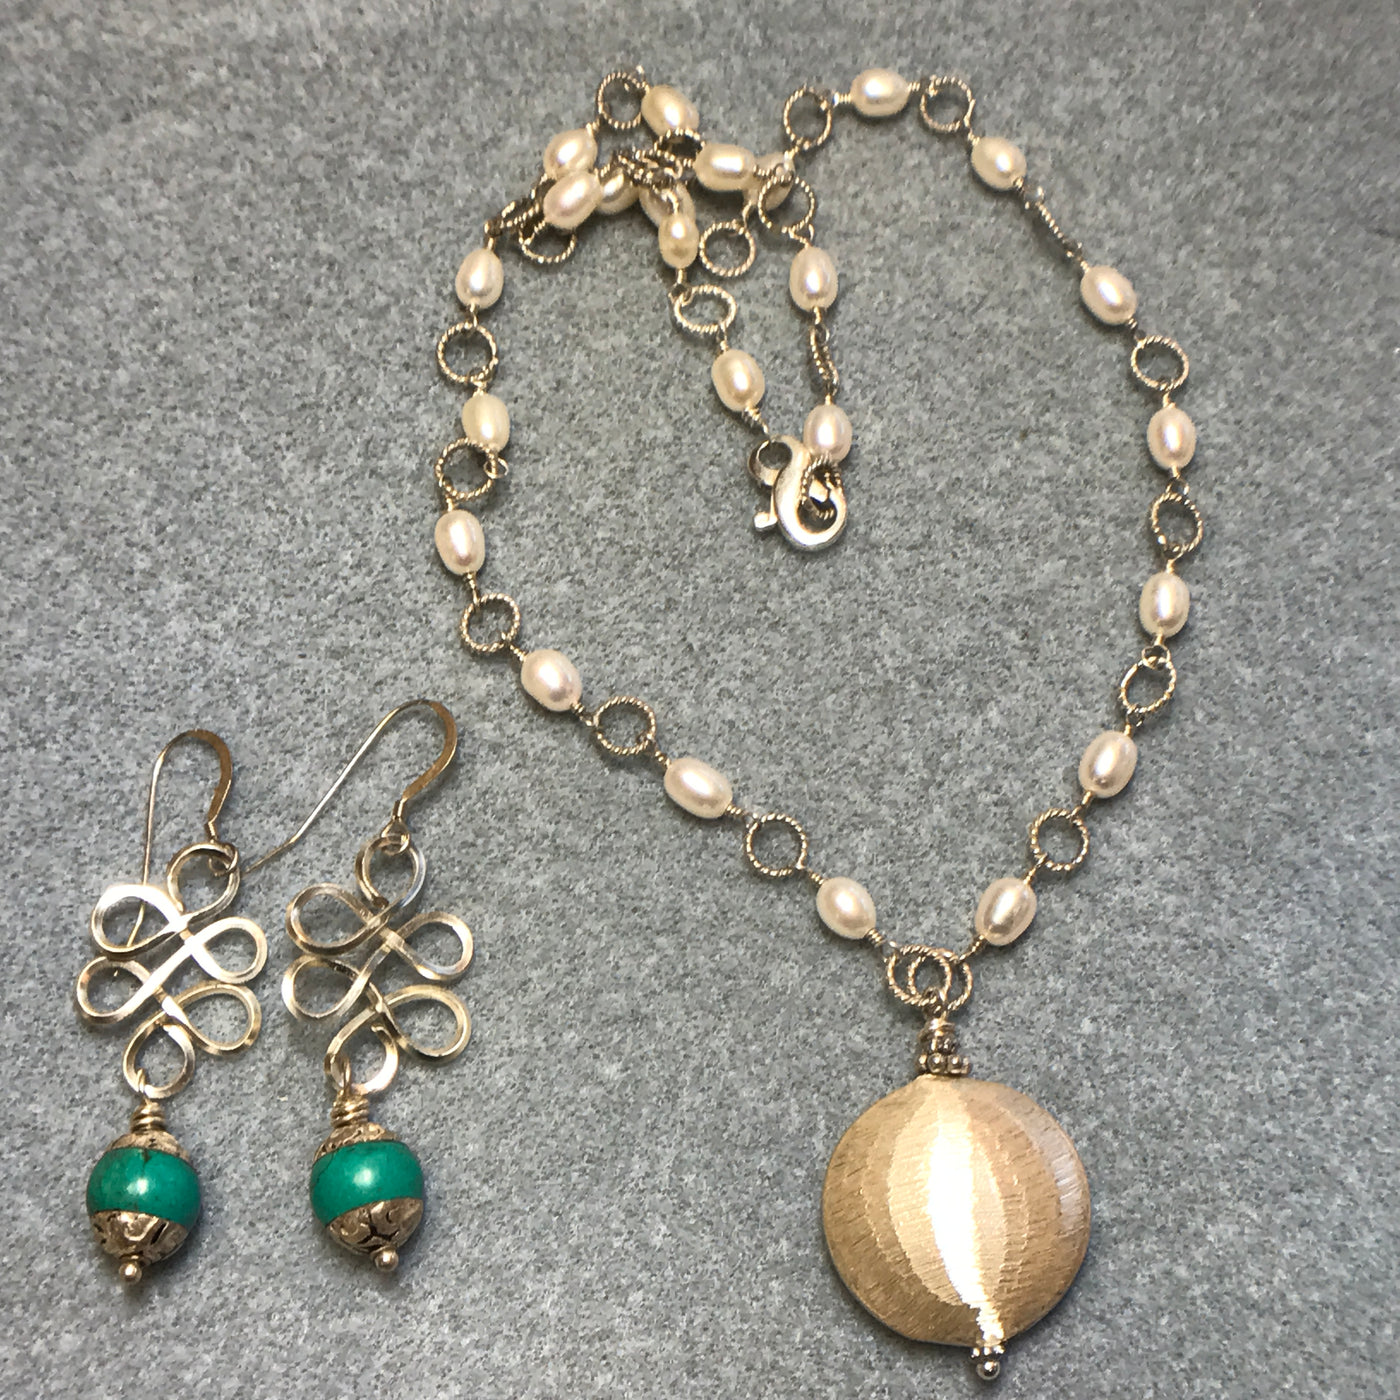 Wire Wrapped Necklace Kit ⋆ Keepsaker Supplies ⋆ DIY